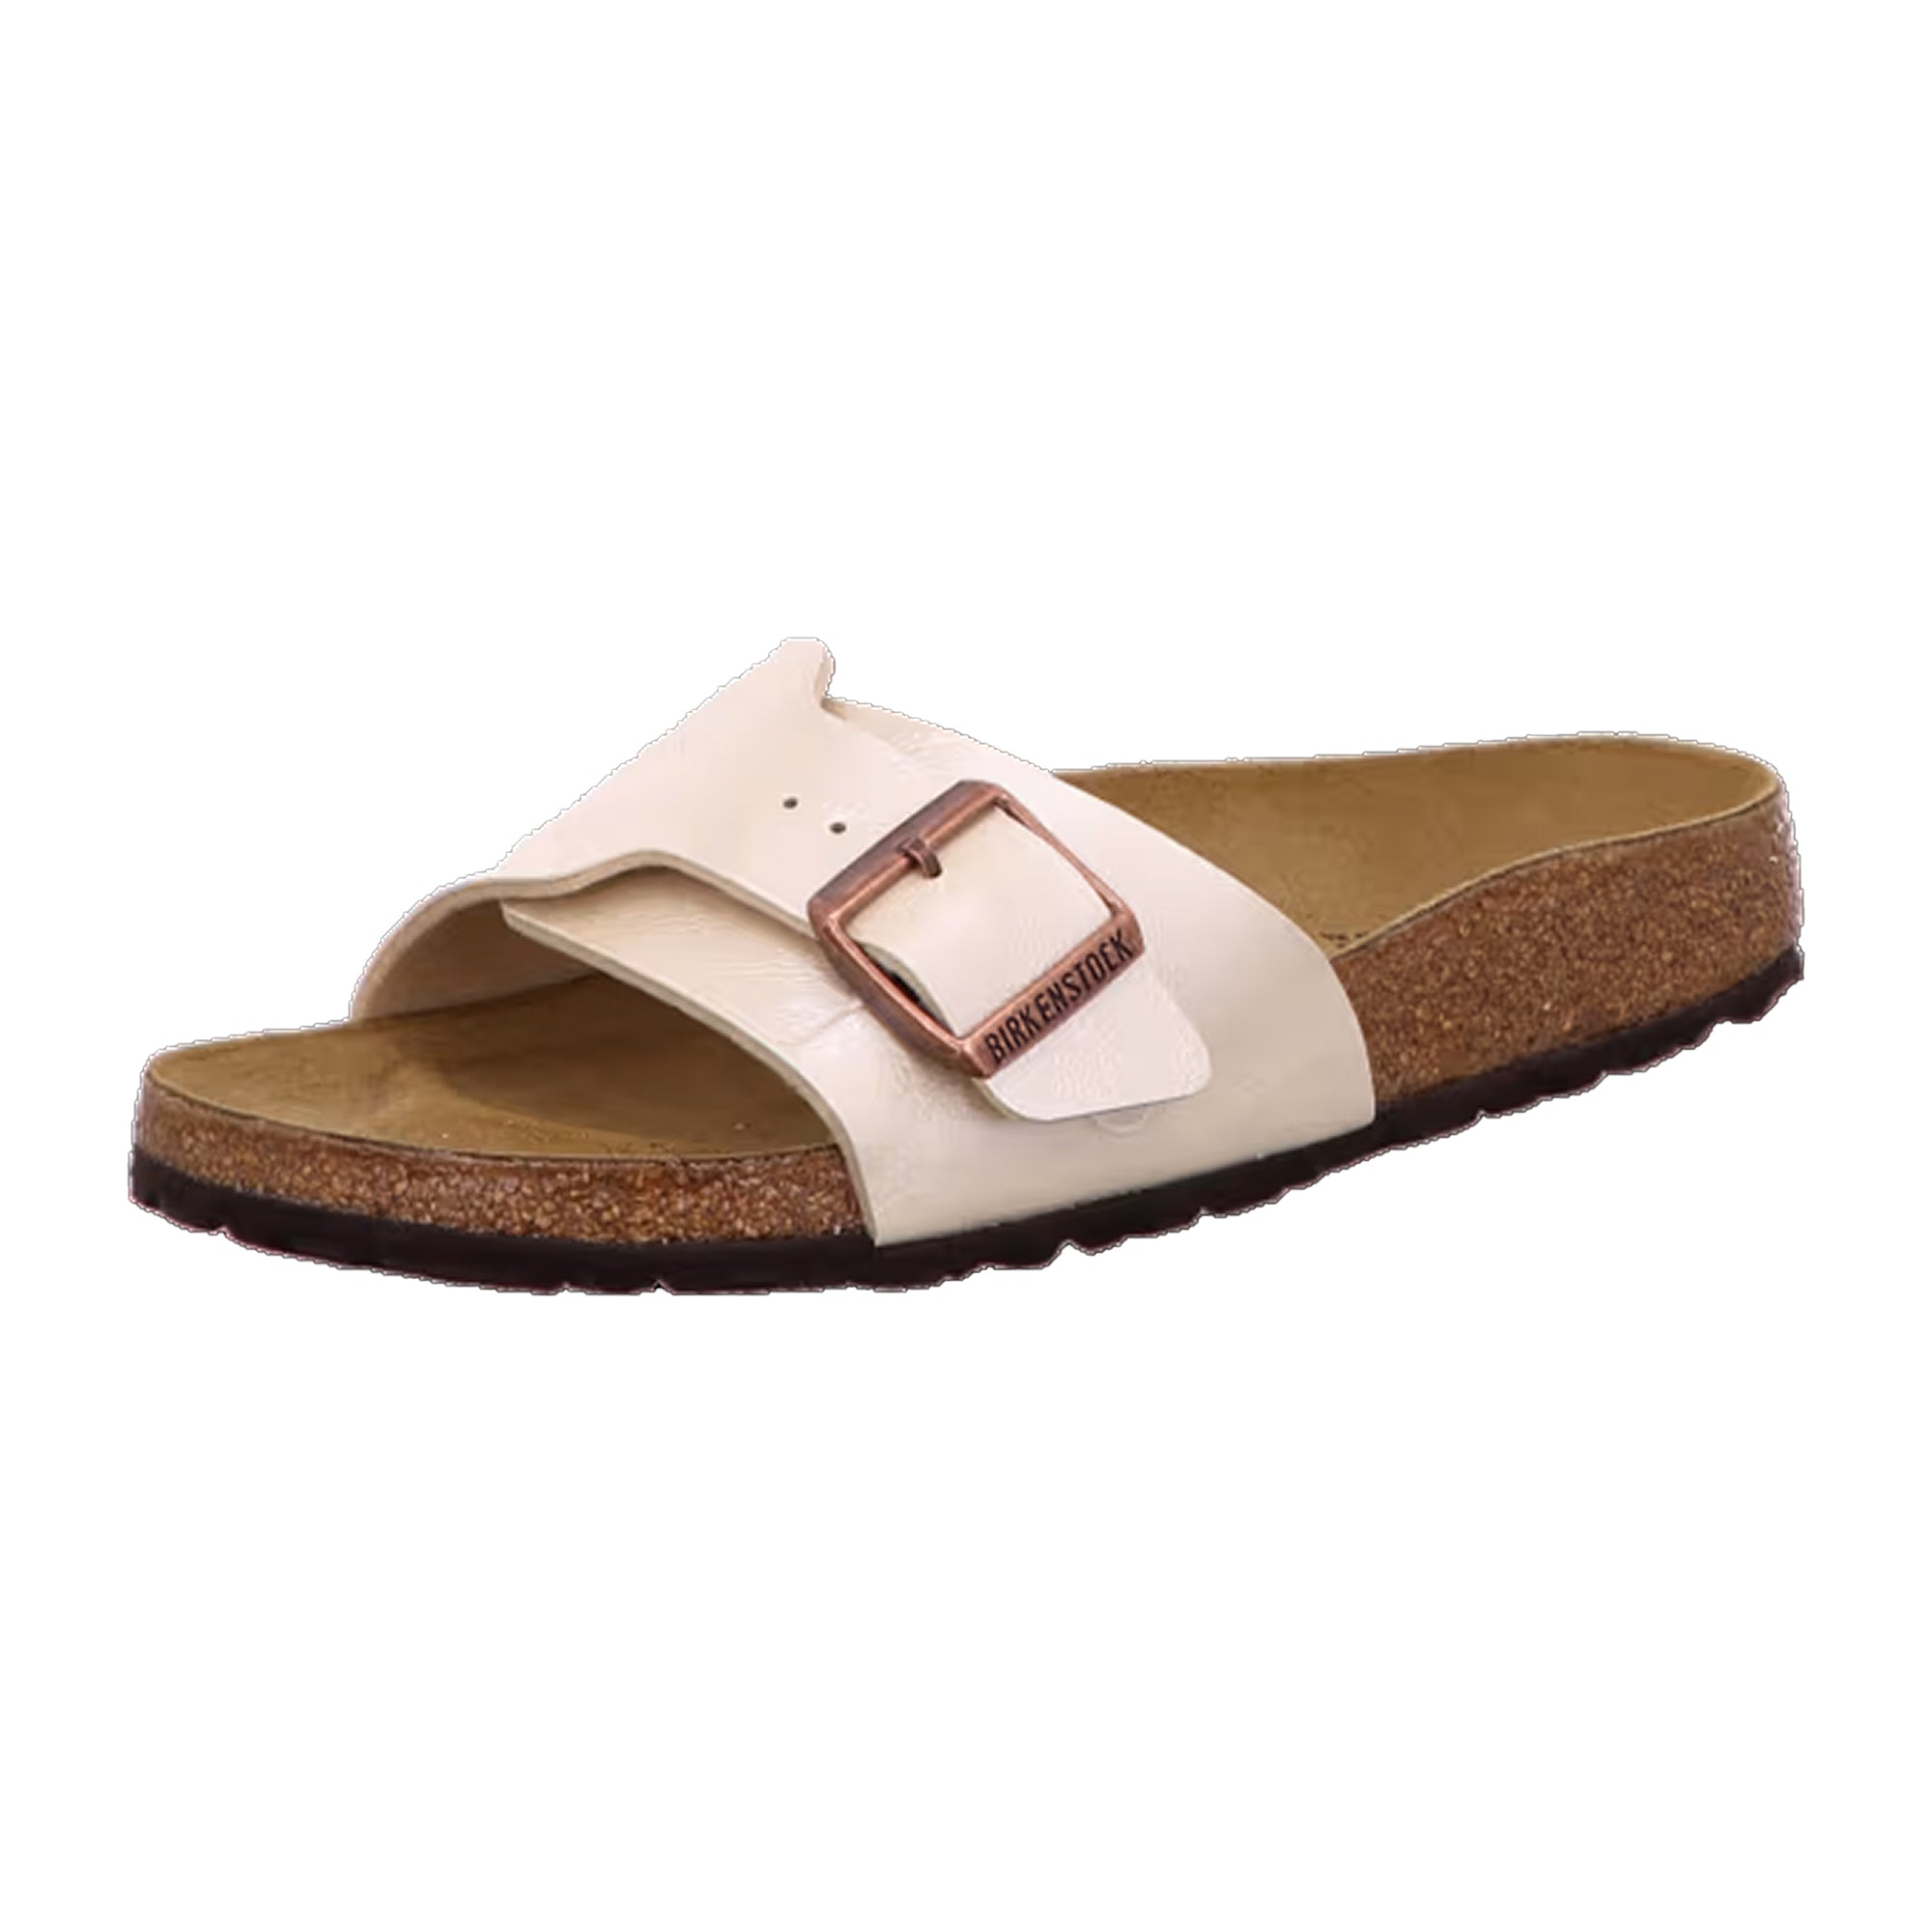 Birkenstock Catalina BF BS Graceful Taupe Pearl White Sandals Slides Clogs New